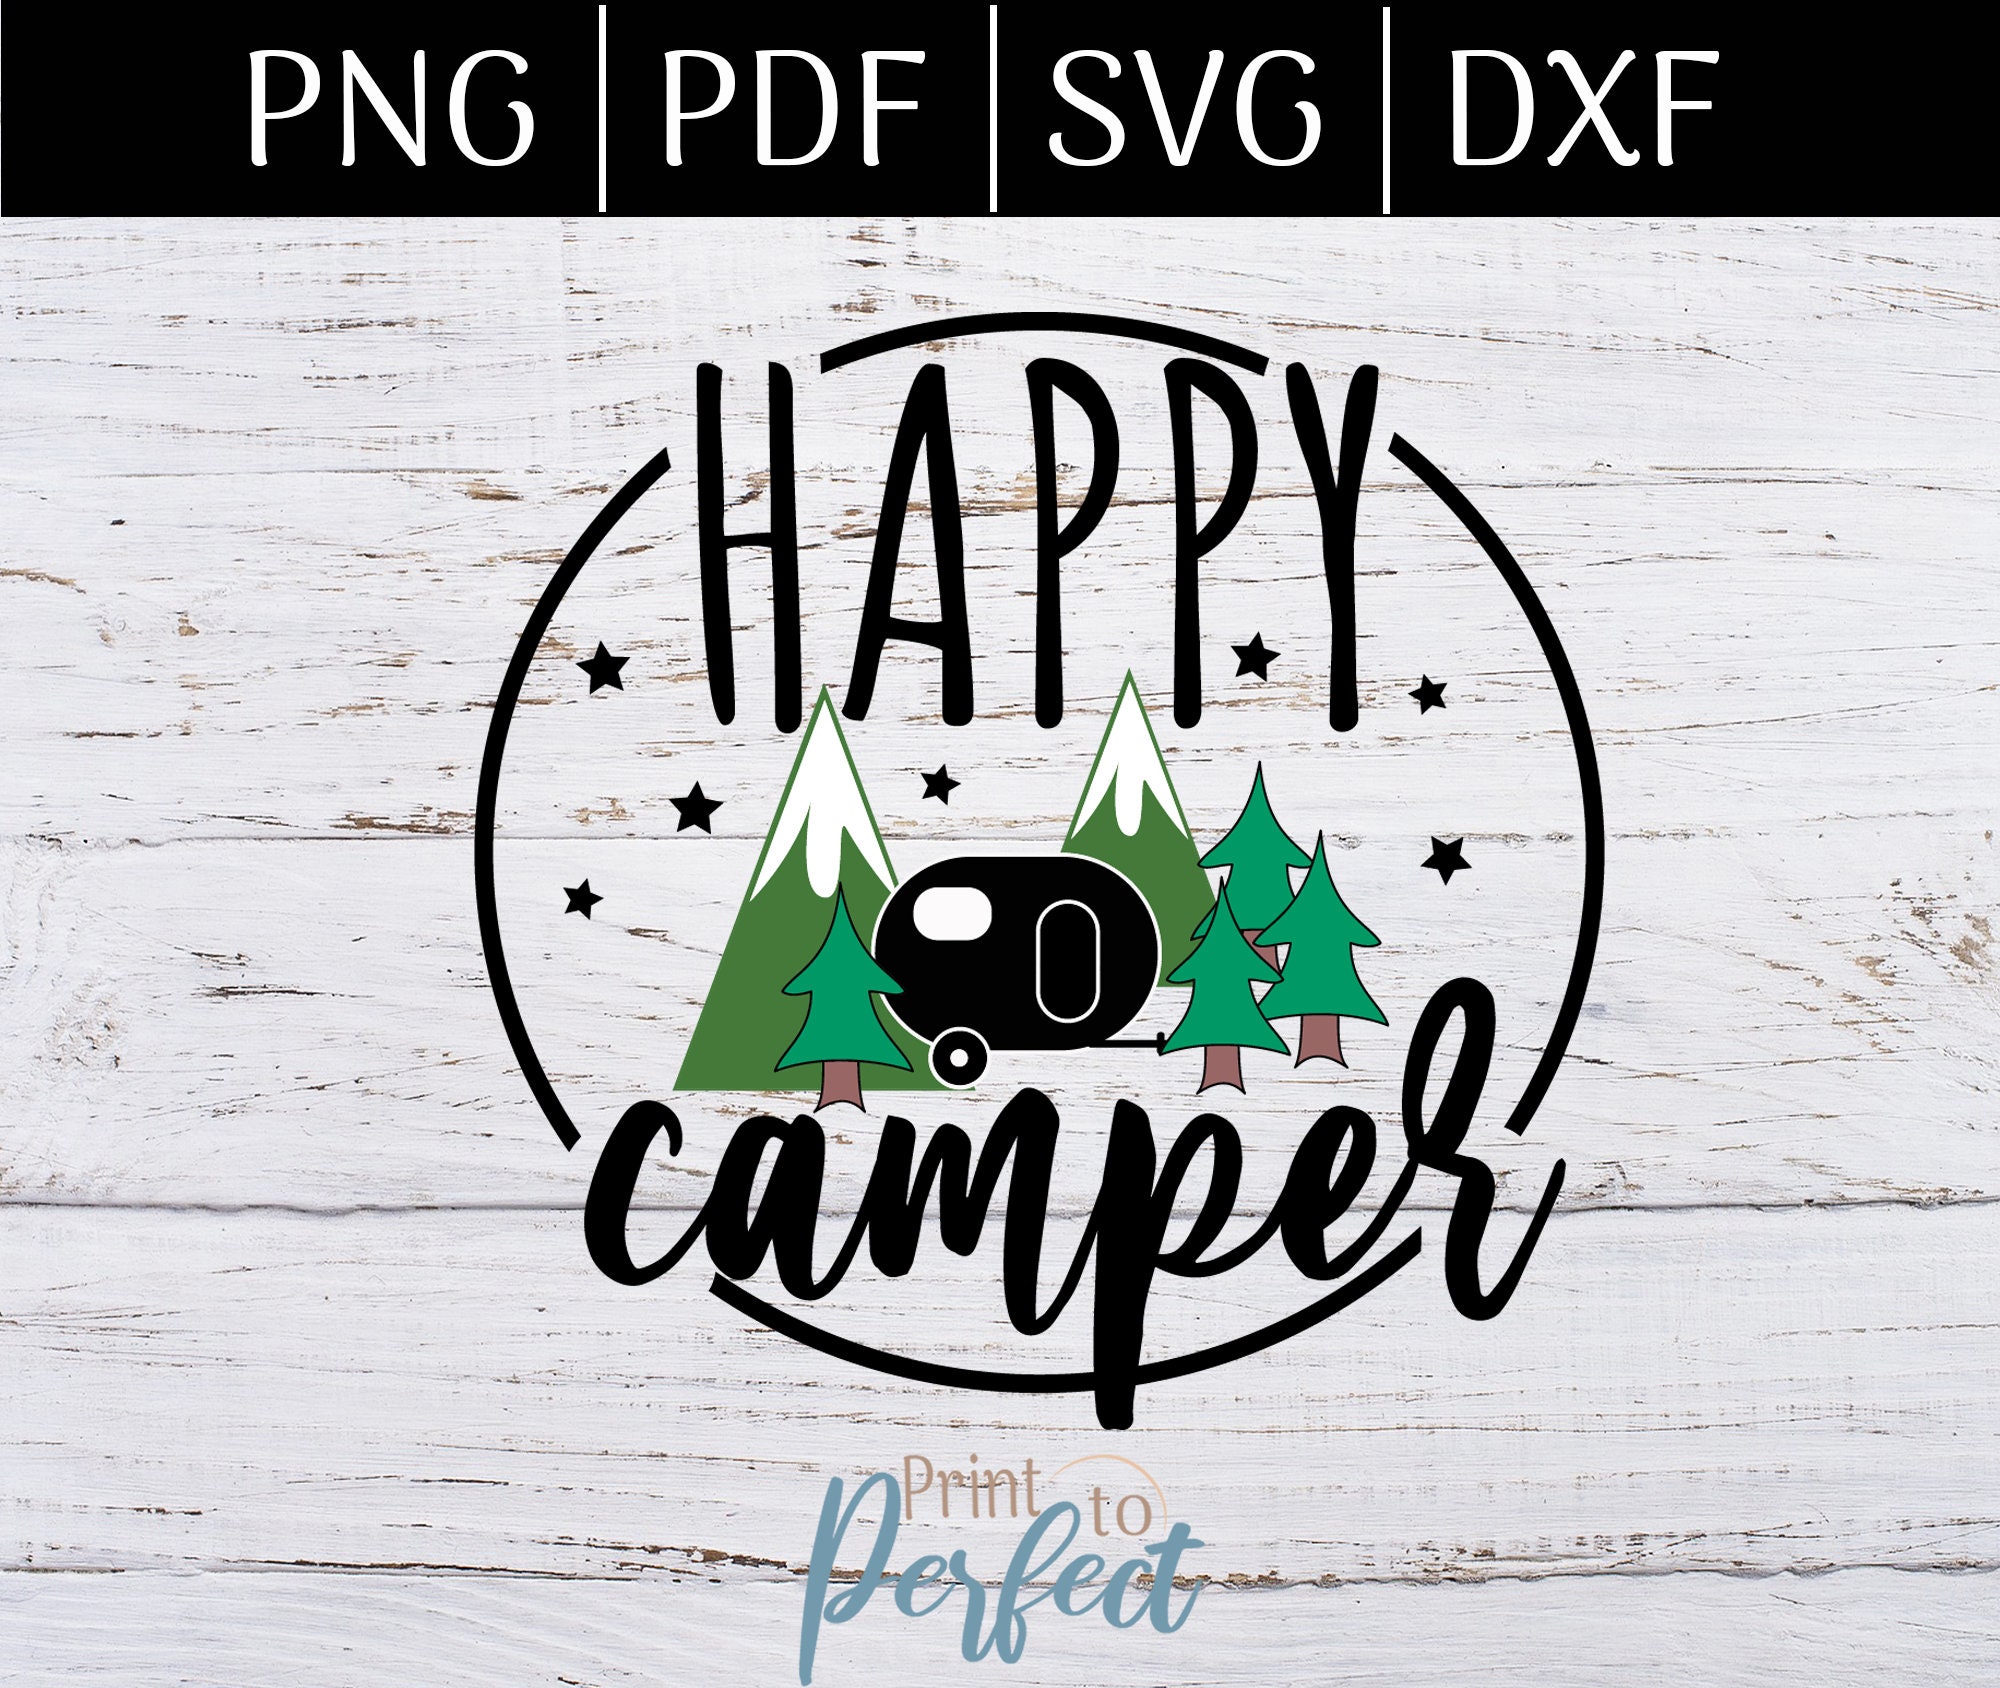 Happy Campers Campsite Printable Sign Camping SVG Camping - Etsy